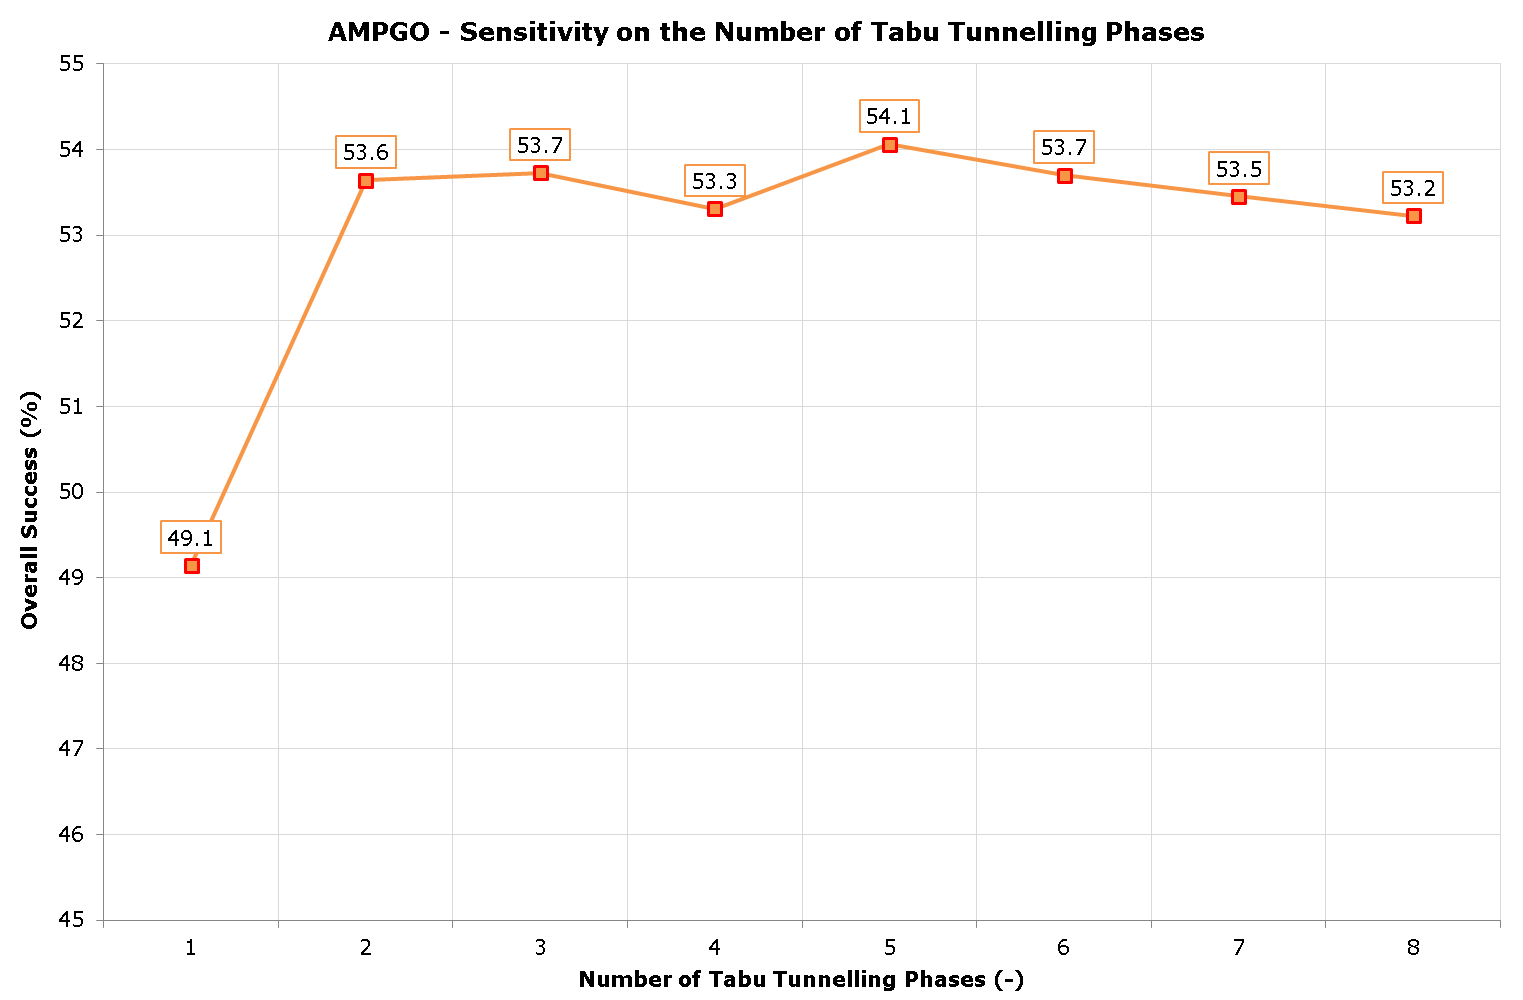 AMPGO Number of tabu tunnelling phases sensitivity